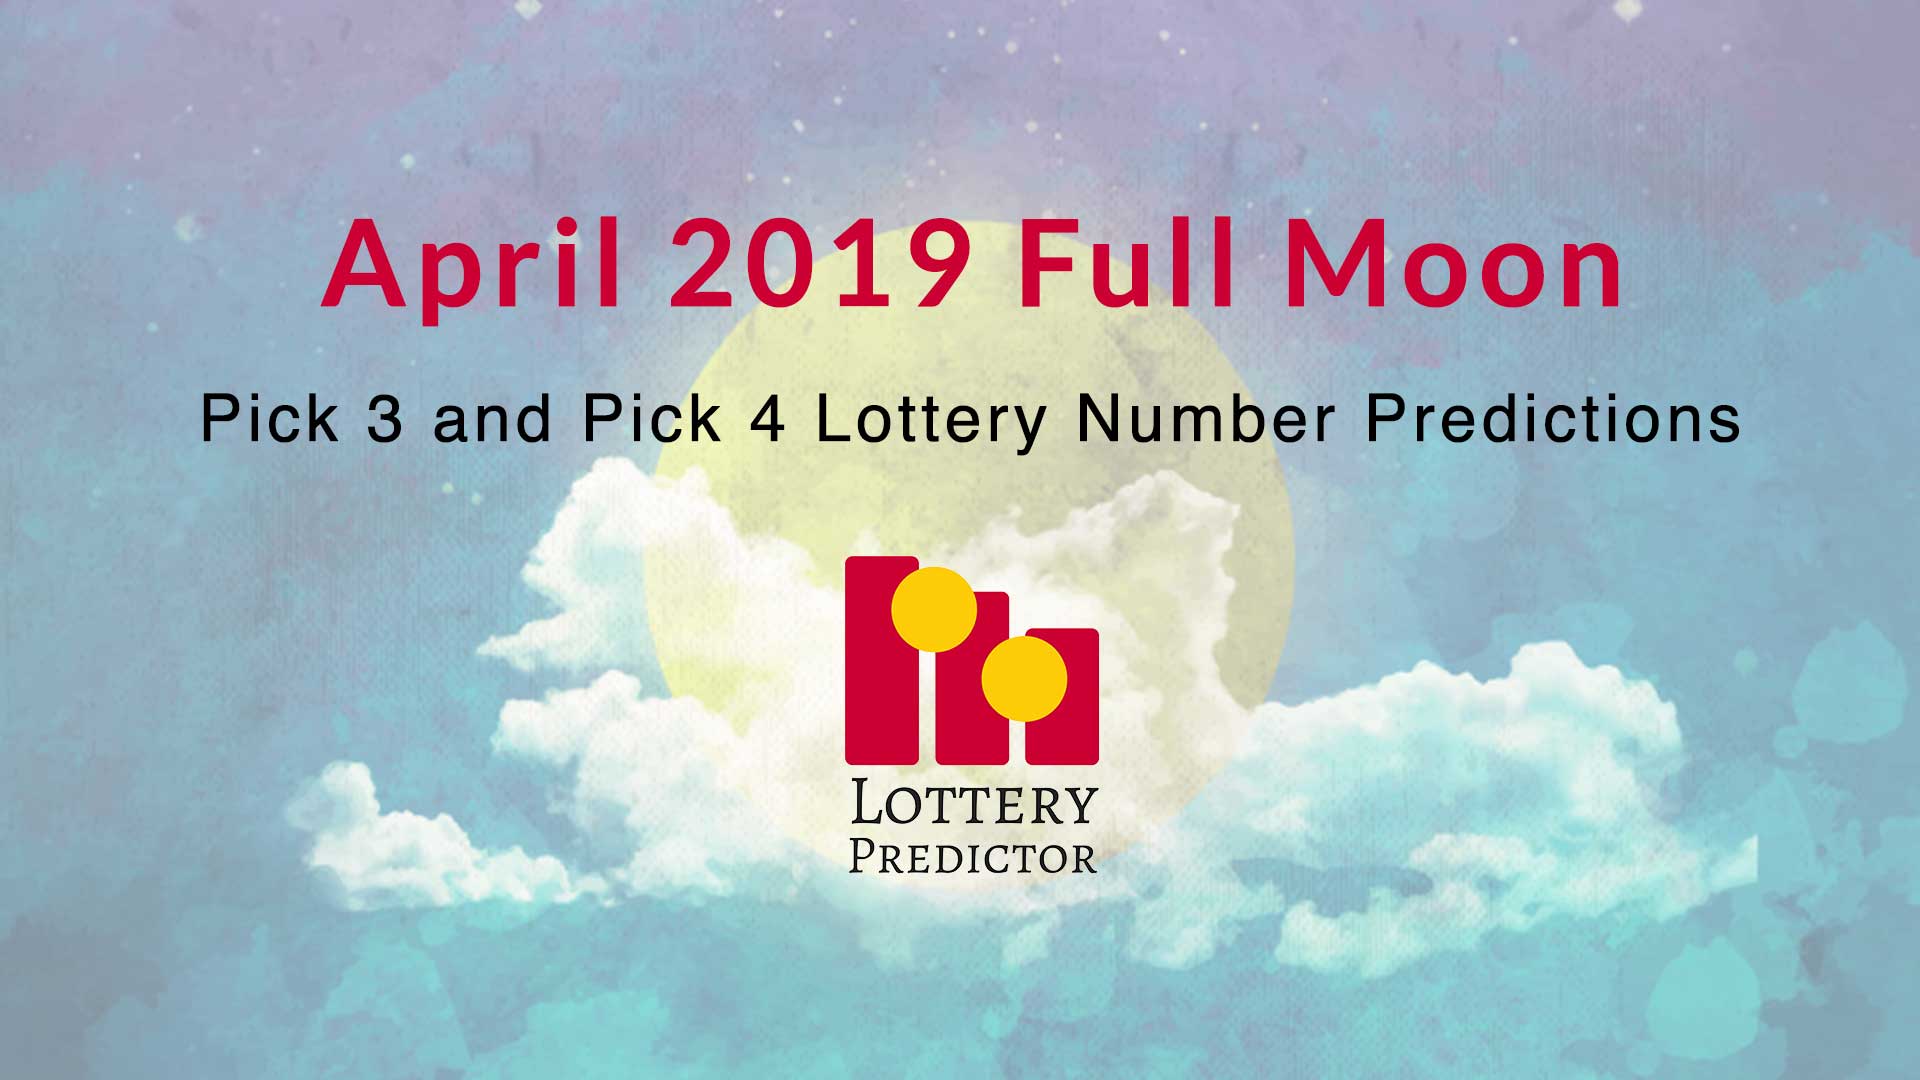 April 2019 Full Moon Pick 3 and Pick 4 Lottery Number Predictions